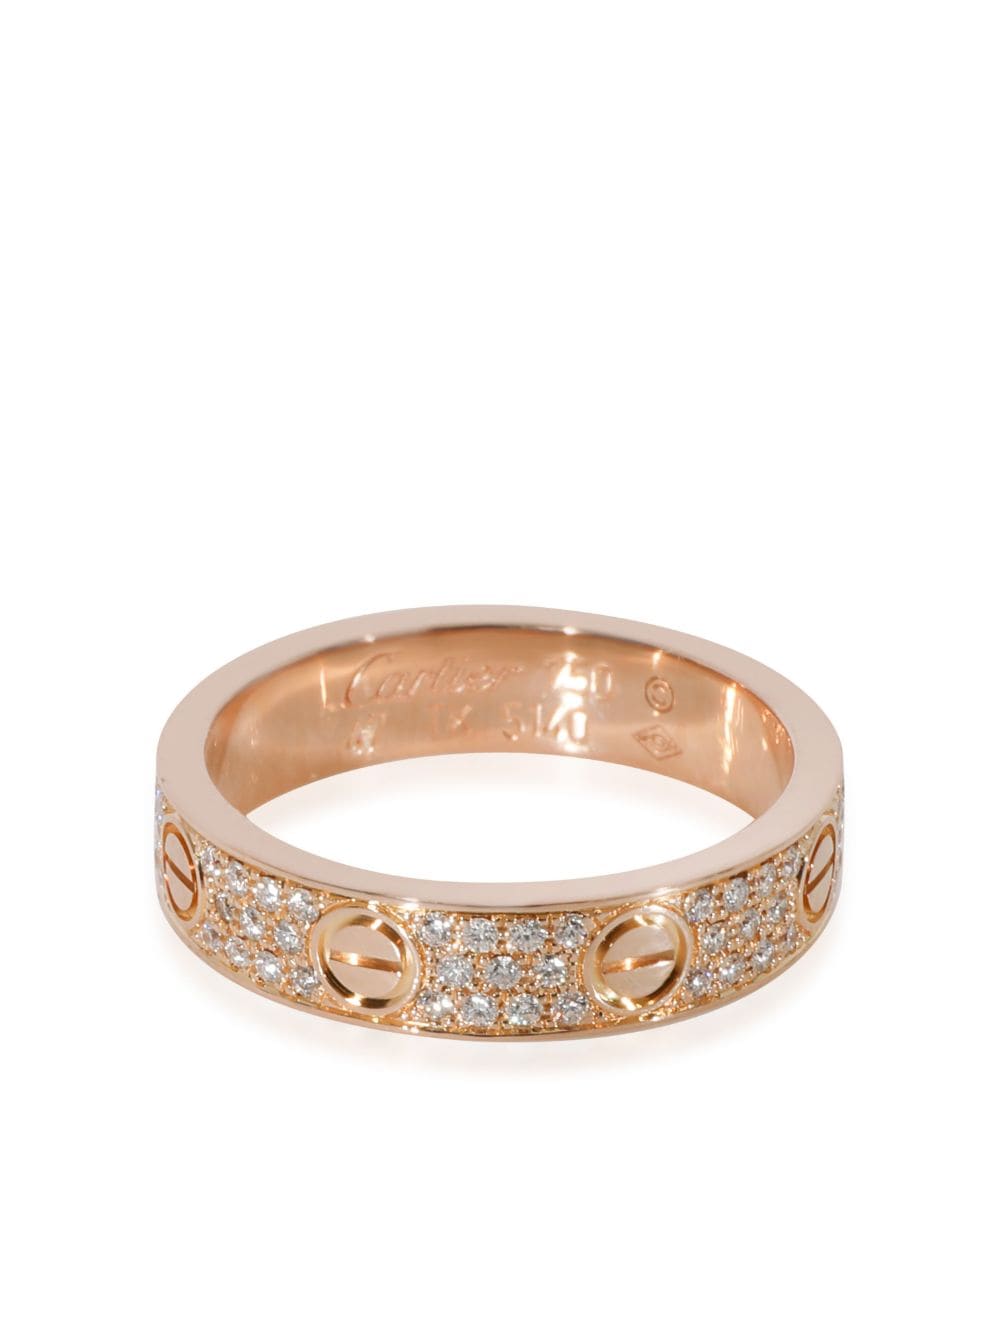 Pre-owned Cartier  18kt Rose Gold Love Diamond Ring